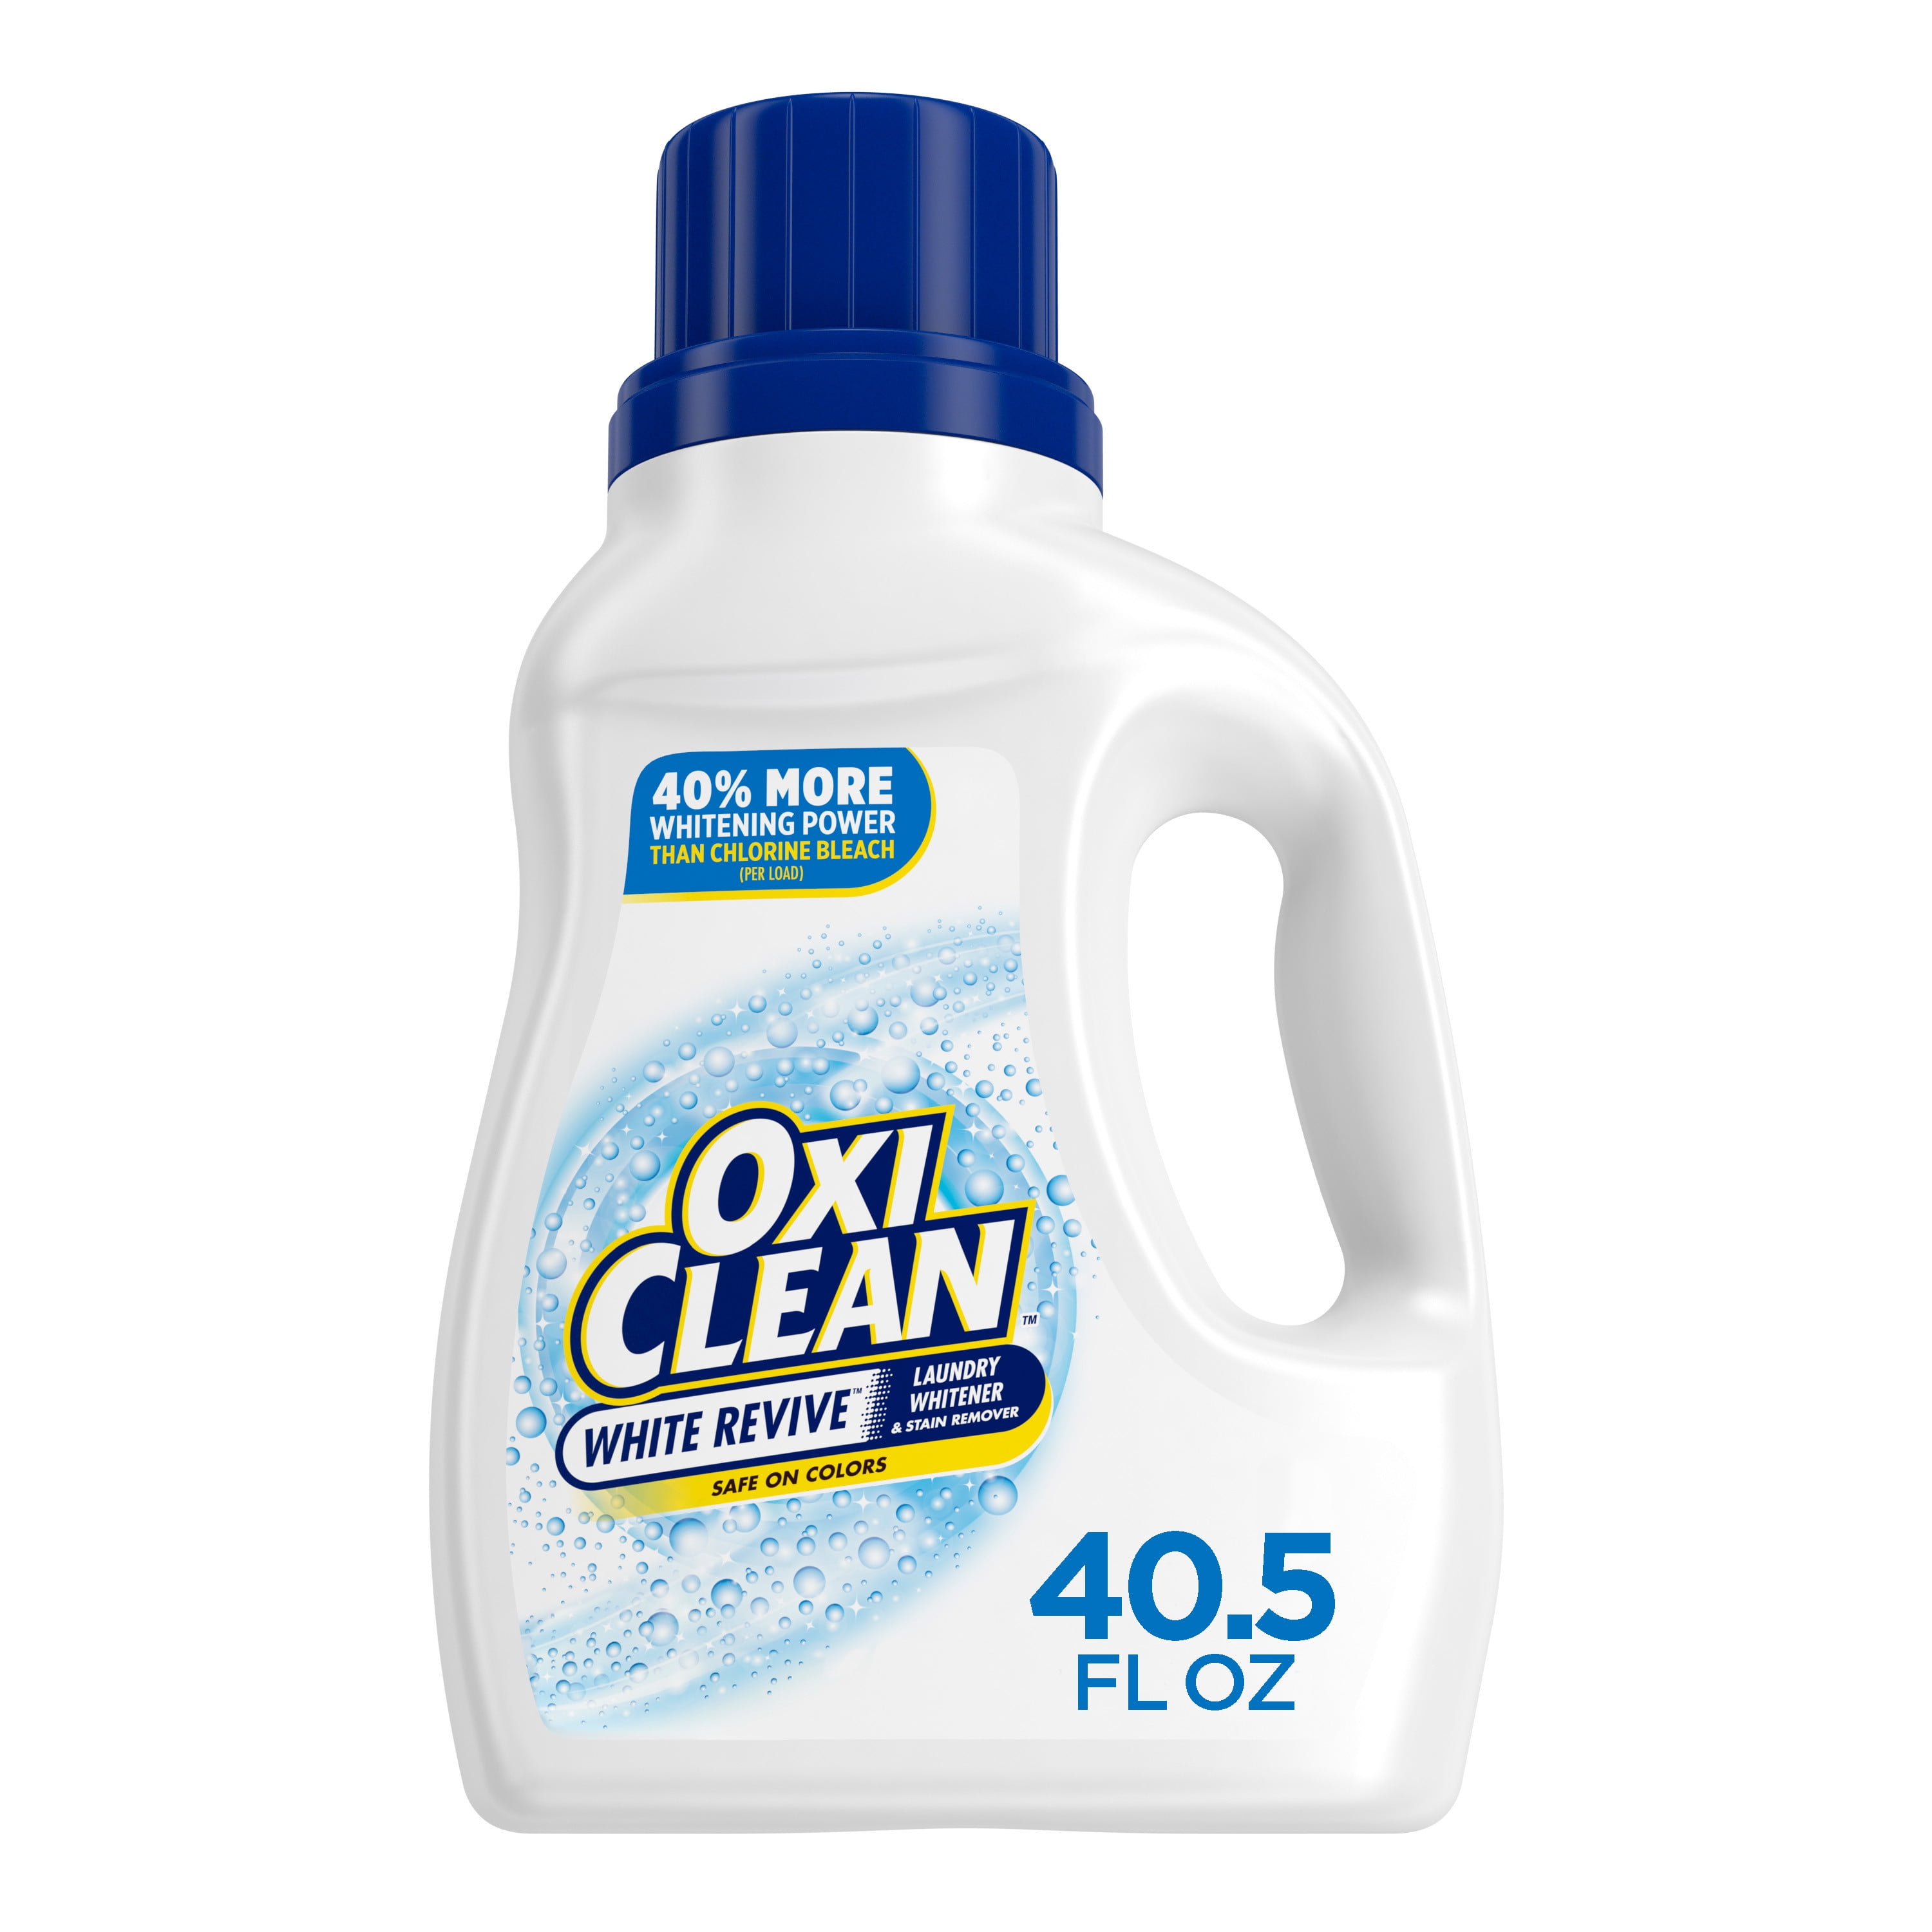 OxiClean White Revive for White Clothes 